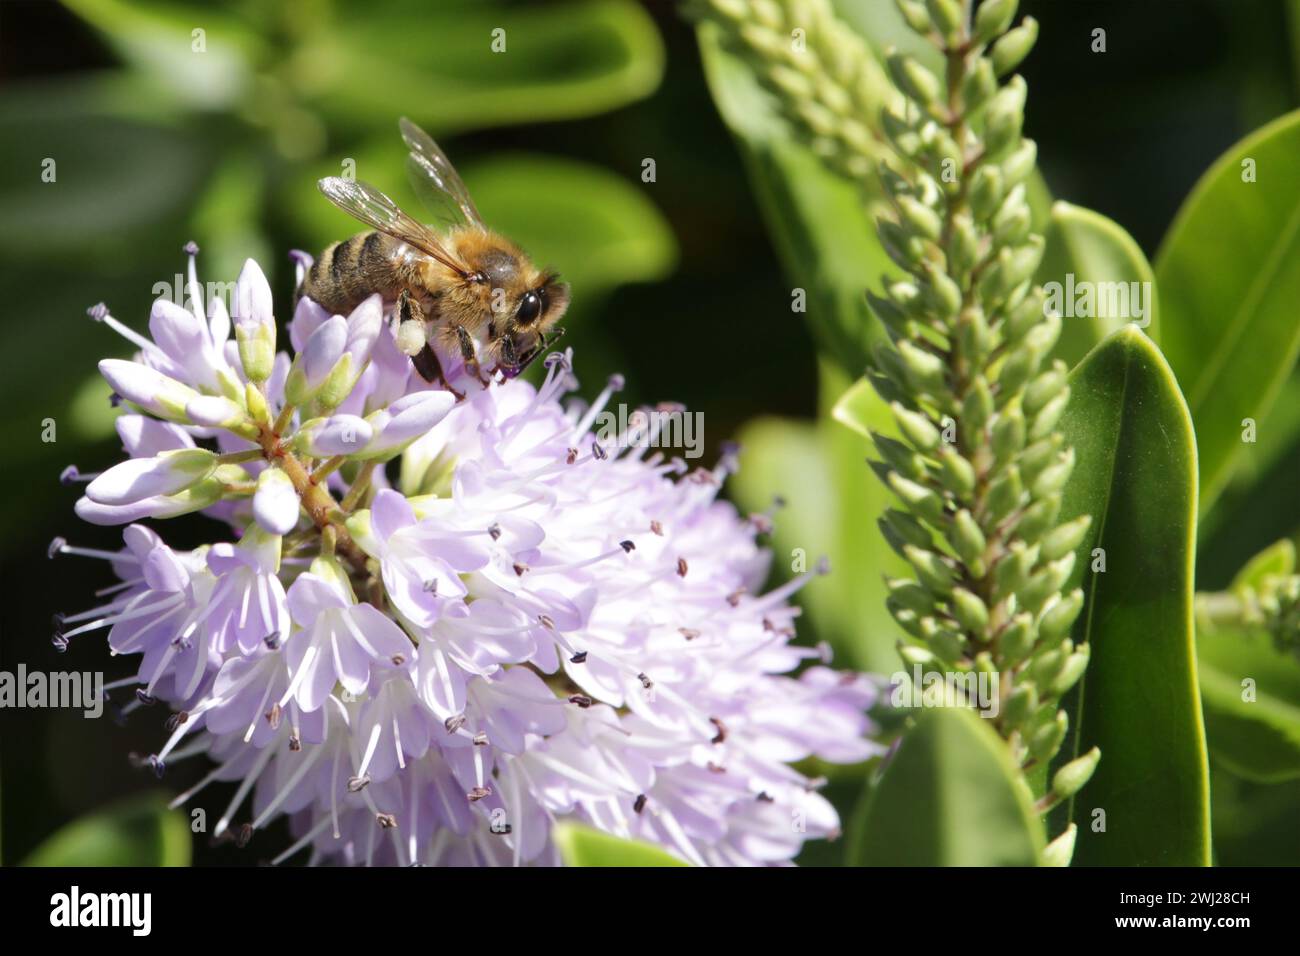 Western Honey Bee (Apis mellifera) collecting nectar and pollen from Hebe flower, South Australia Stock Photo